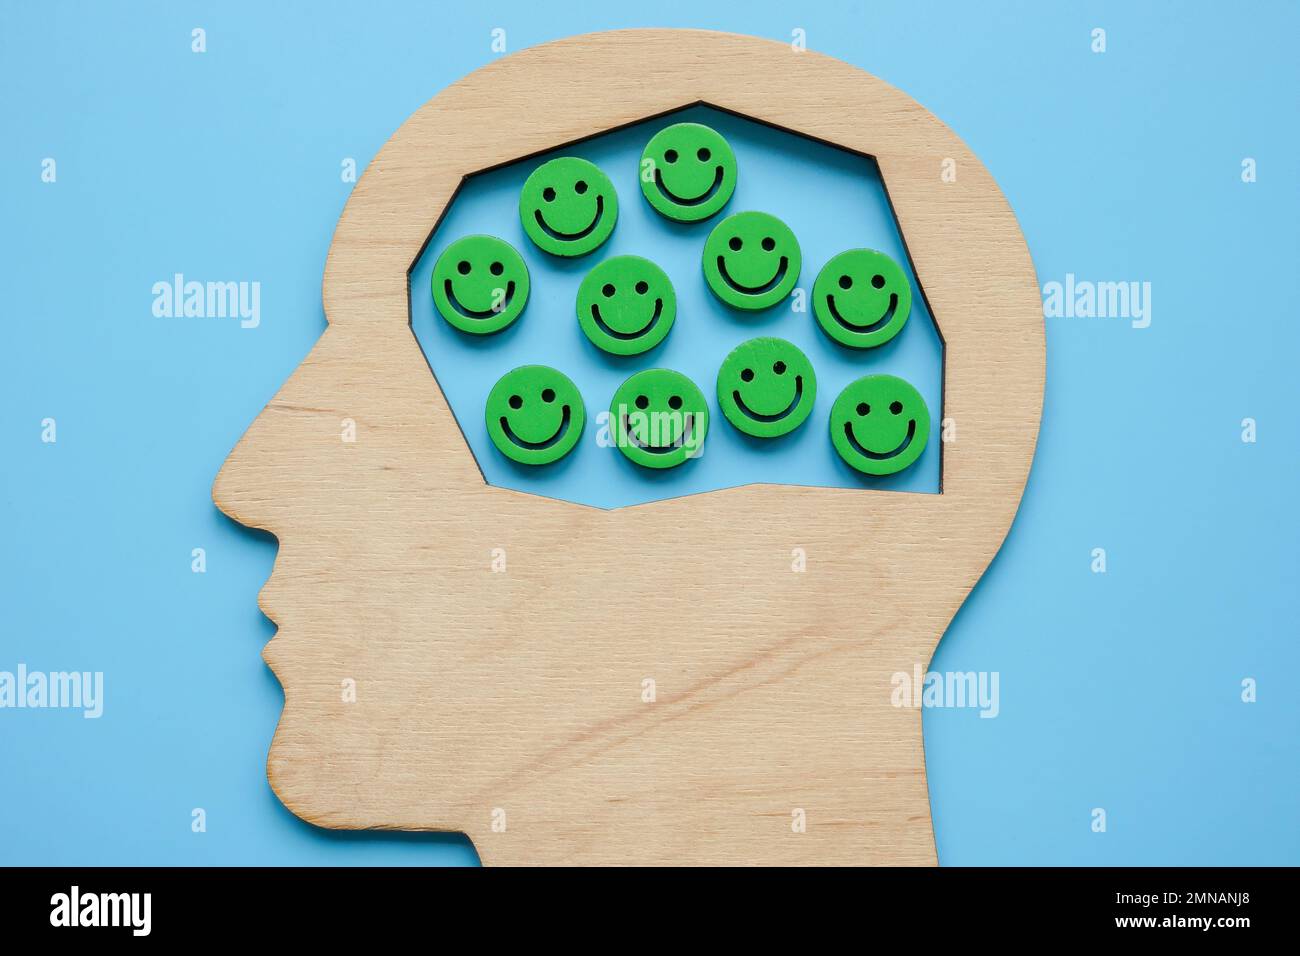 Positive attitude and emotions. Smiley emoticons in a head. Stock Photo